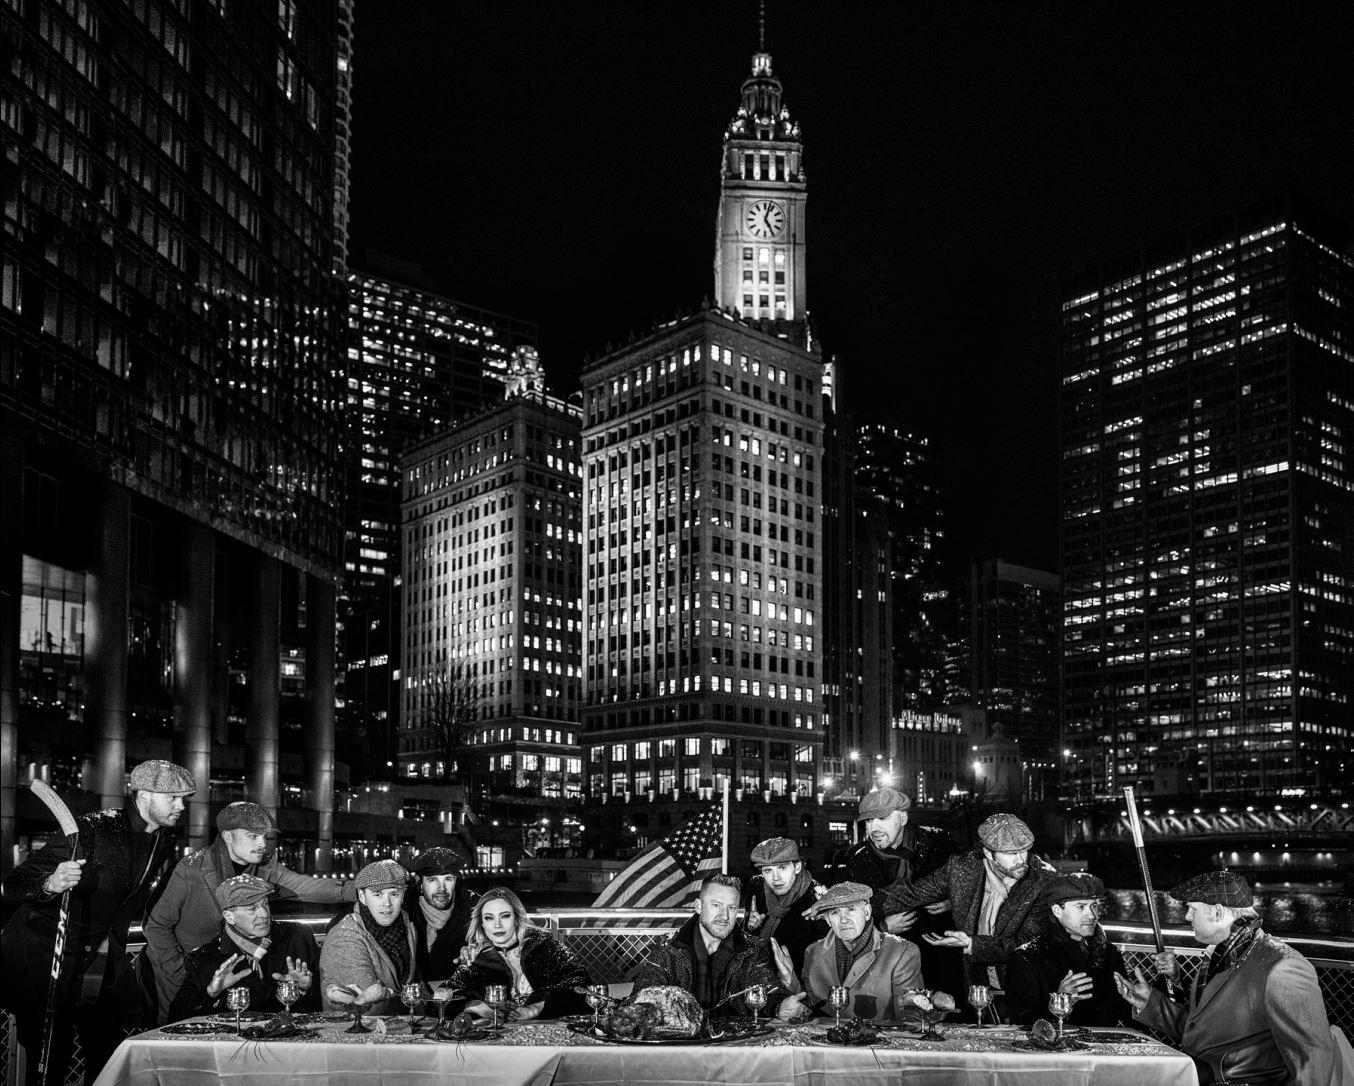 David Yarrow Black and White Photograph - The Last Supper in Chicago - Chicago skyline and Blackhawks players sitting down